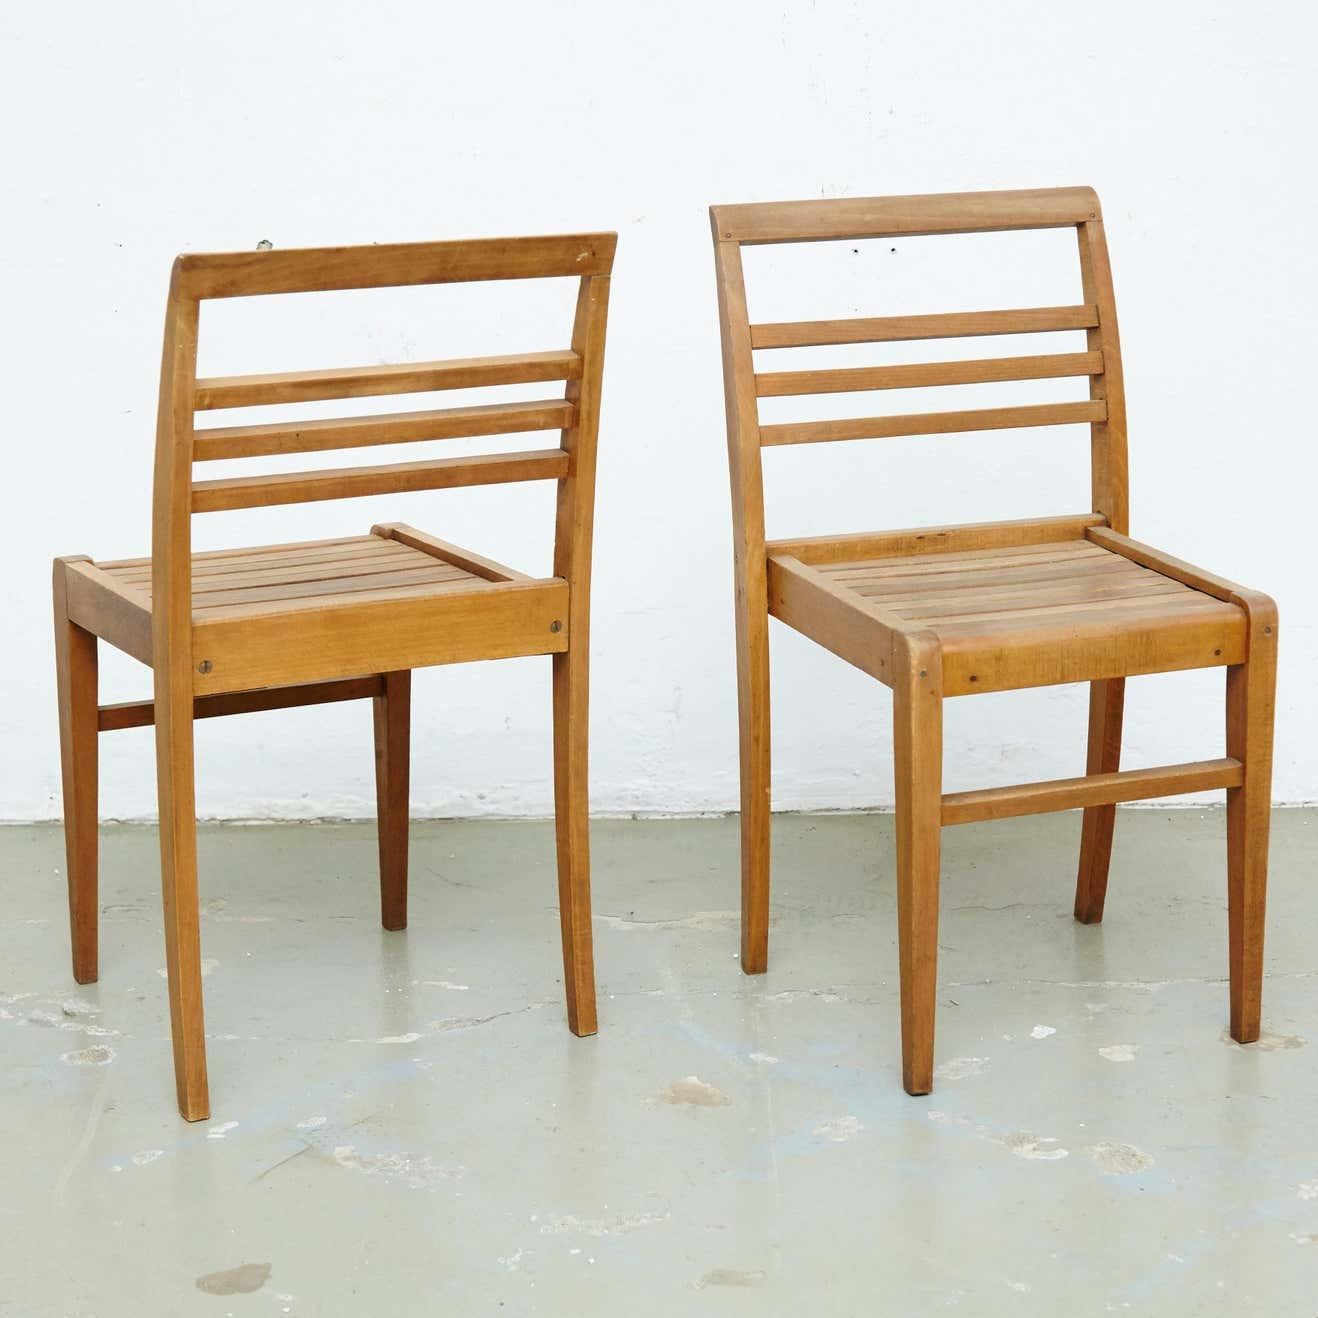 Chairs designed by Rene Gabriel, circa 1946.
Manufactured in France, circa 1946.
Oak wood base and structure.

In good original condition, with minor wear consistent with age and use, preserving a beautiful patina.

René Gabriel (1890–1950)